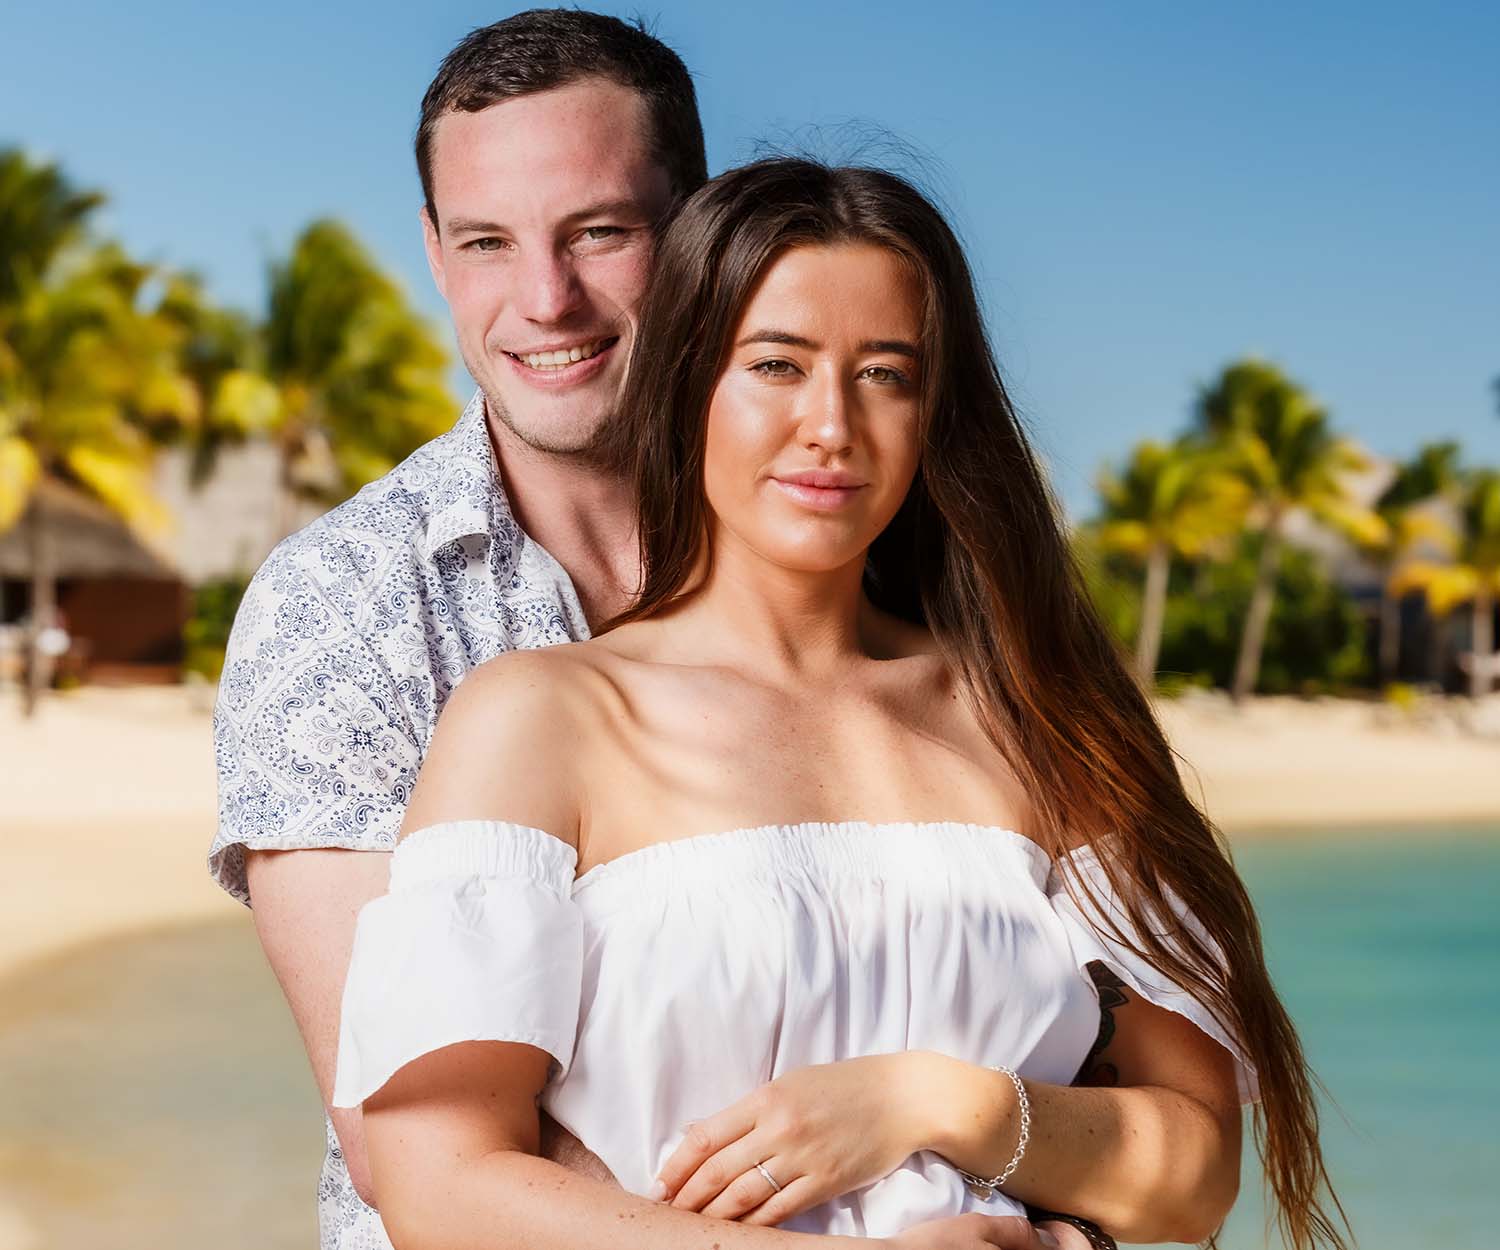 married at first sight nz carmen stimpson and james hardy